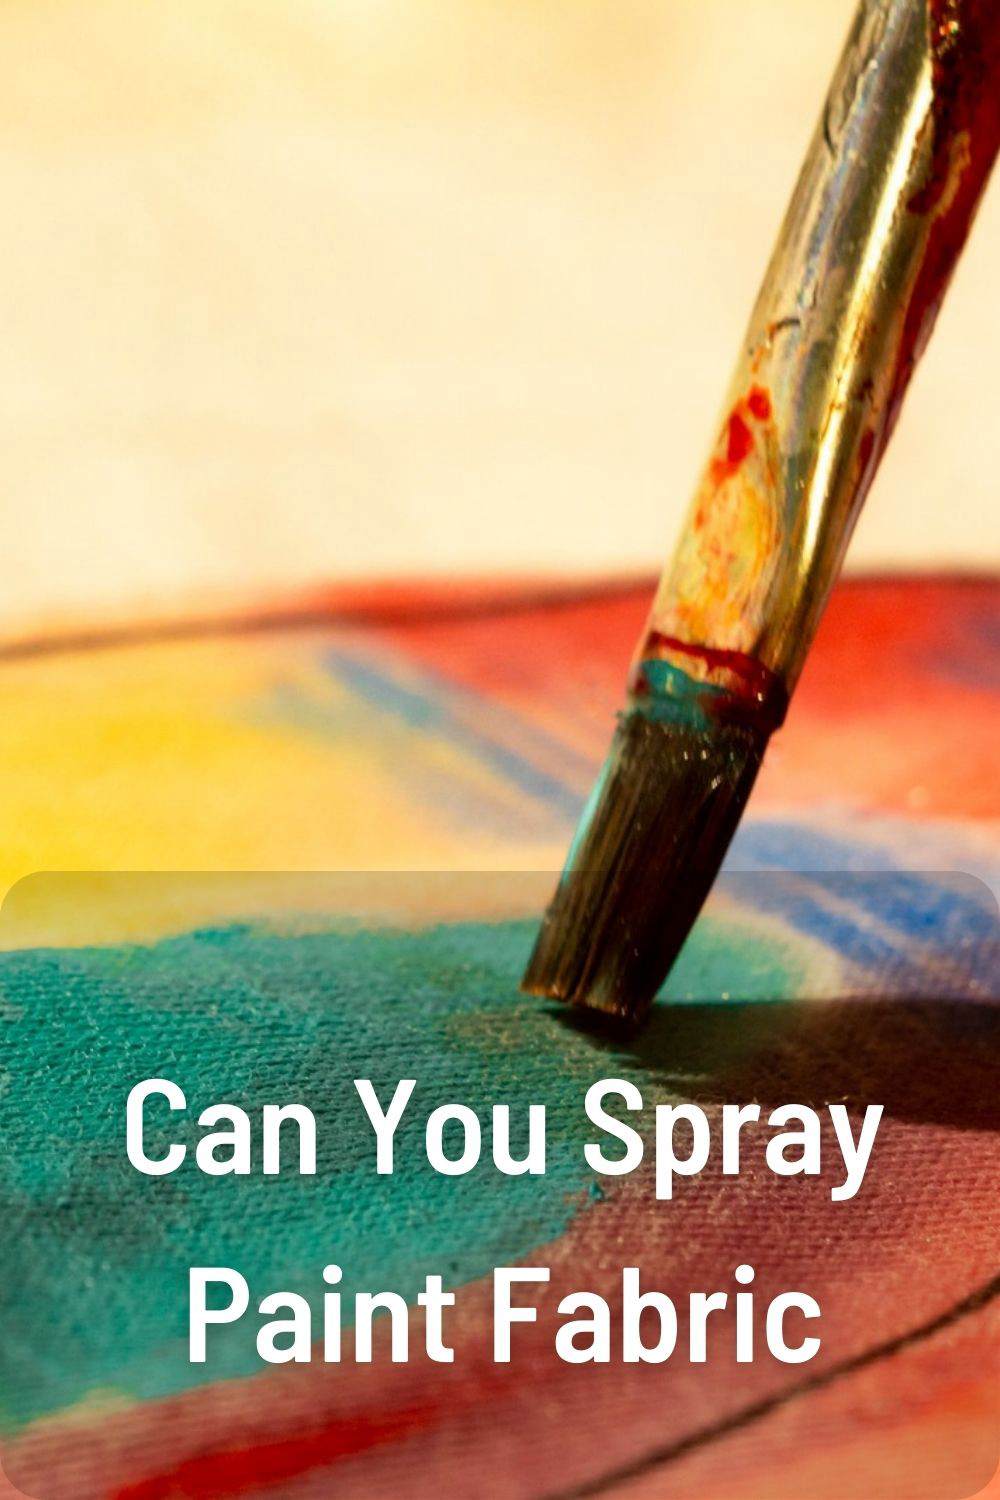 Can You Spray Paint Fabric